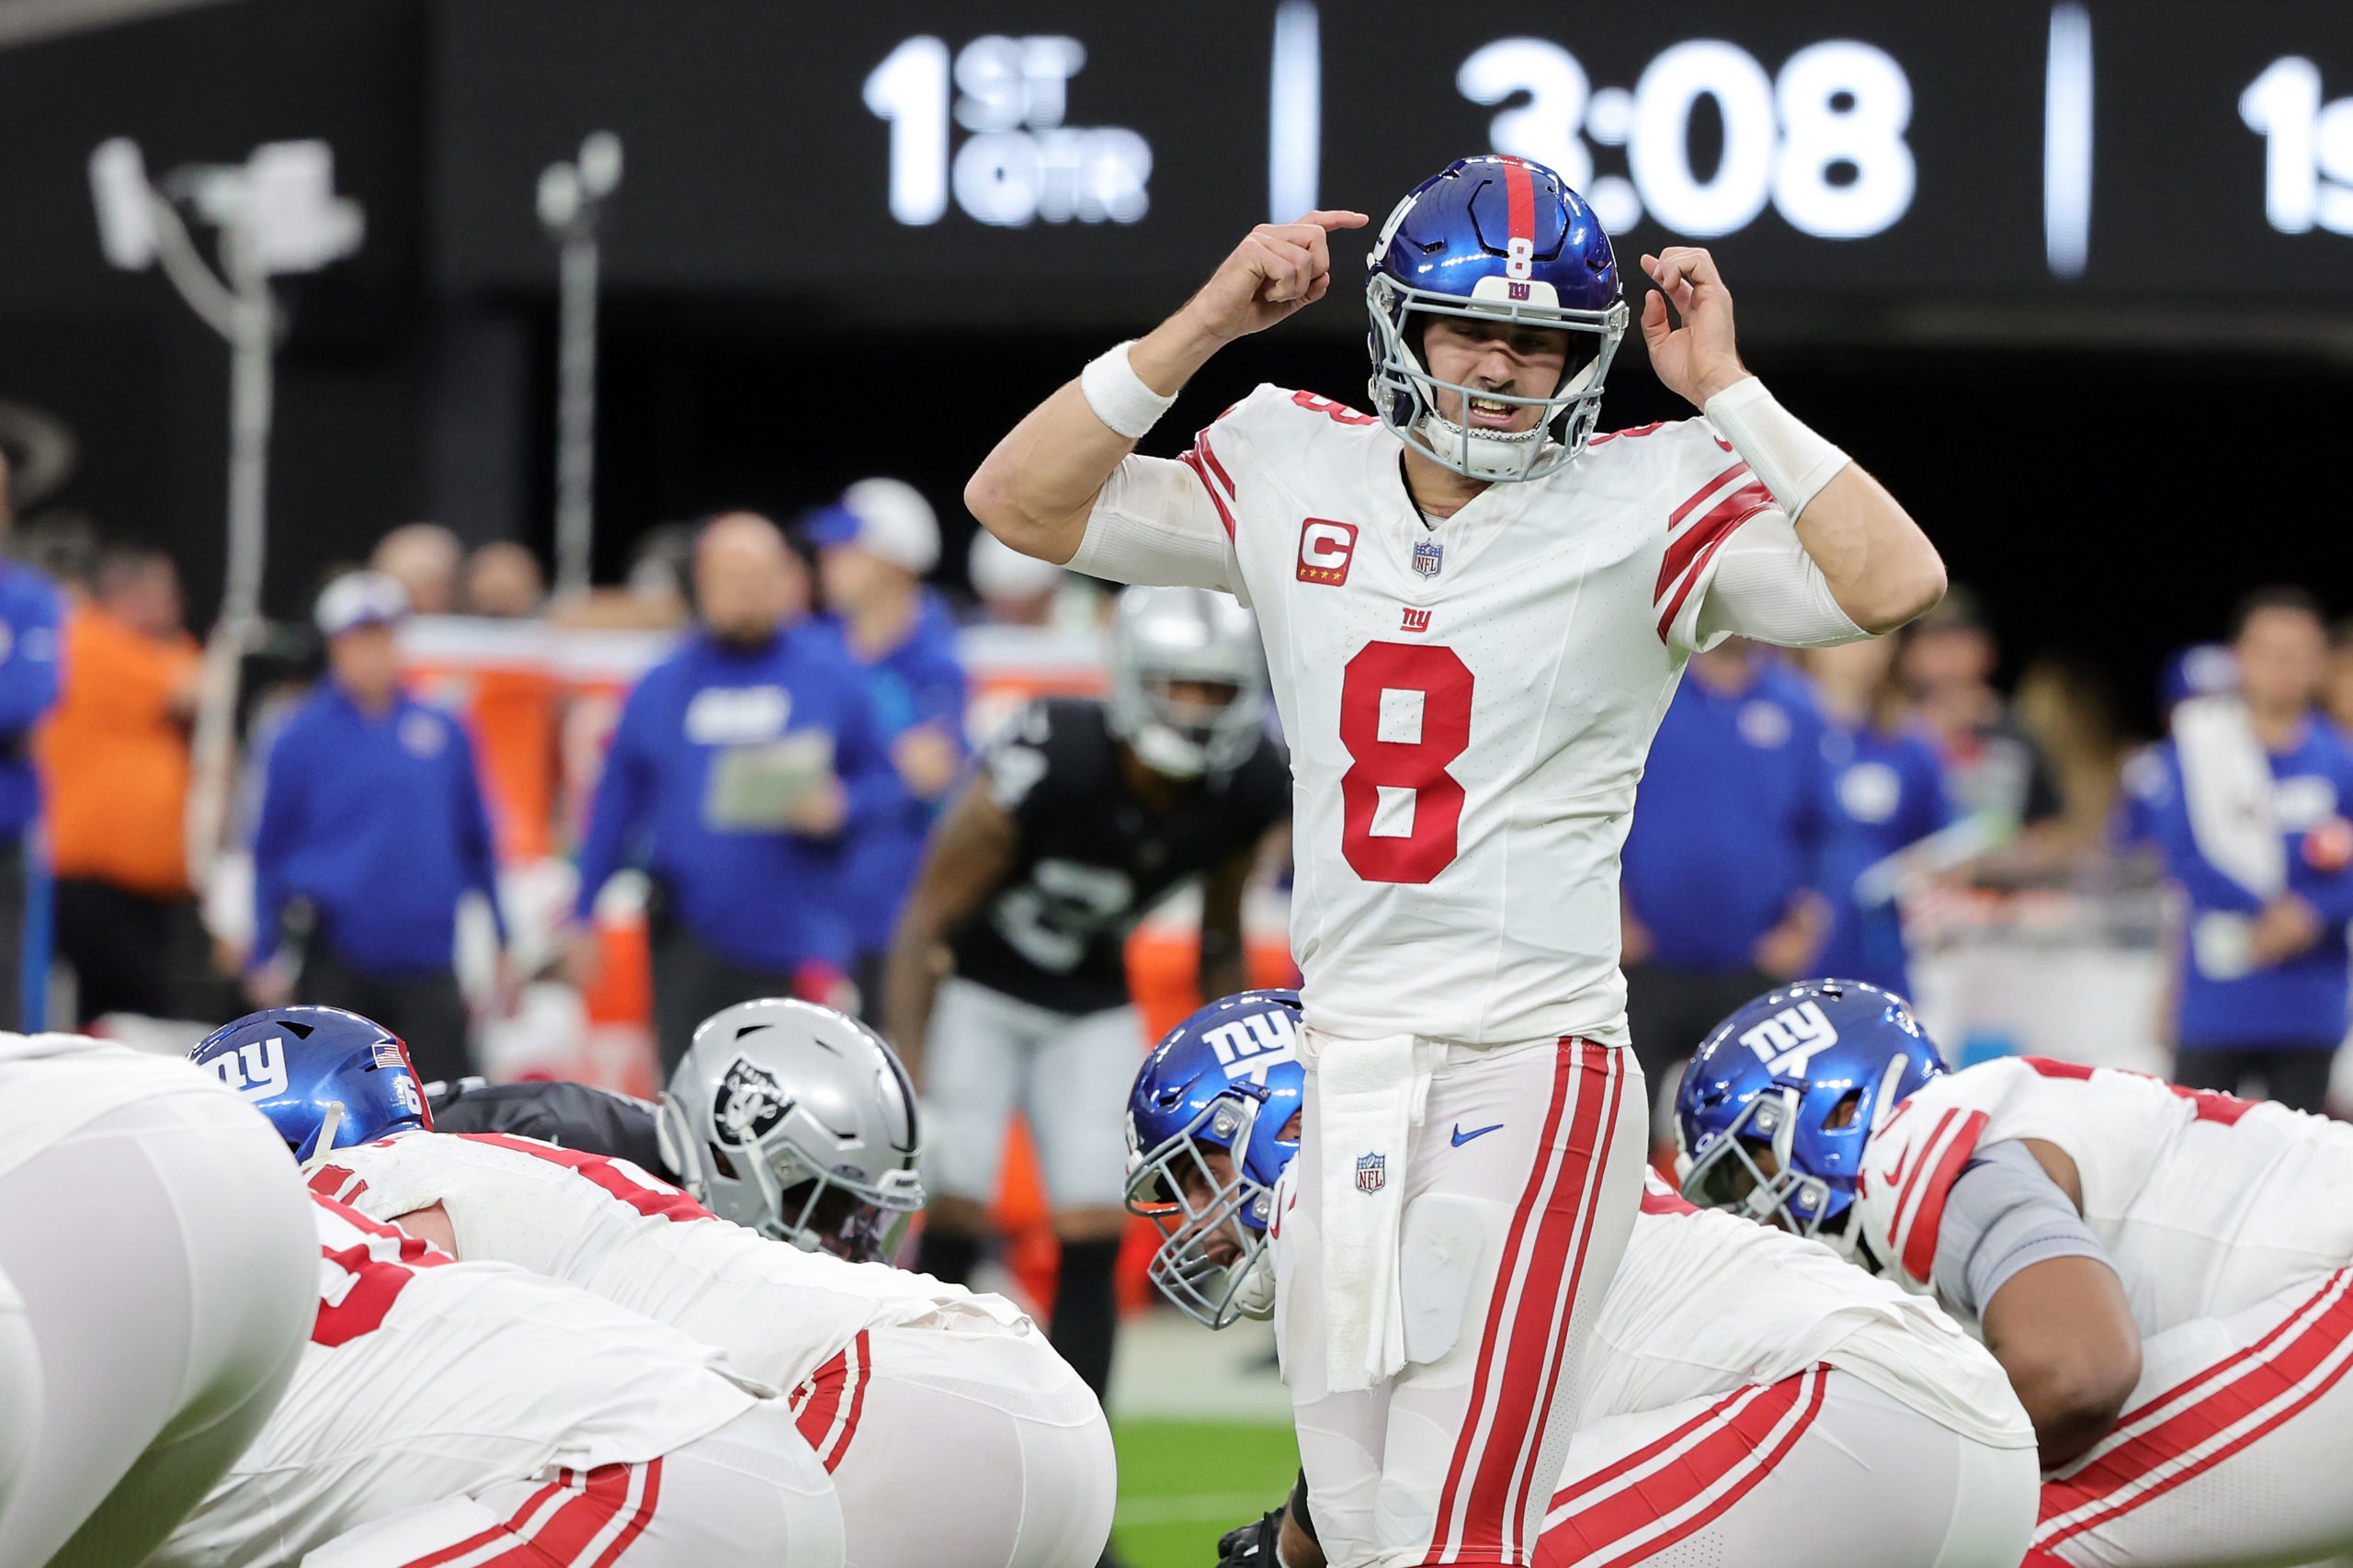 LAS VEGAS, NEVADA - NOVEMBER 05: Daniel Jones #8 of the New York Giants calls a play at the line of scrimmage in the first quarter of a game against the Las Vegas Raiders at Allegiant Stadium on November 05, 2023 in Las Vegas, Nevada. Ethan Miller/Getty Images